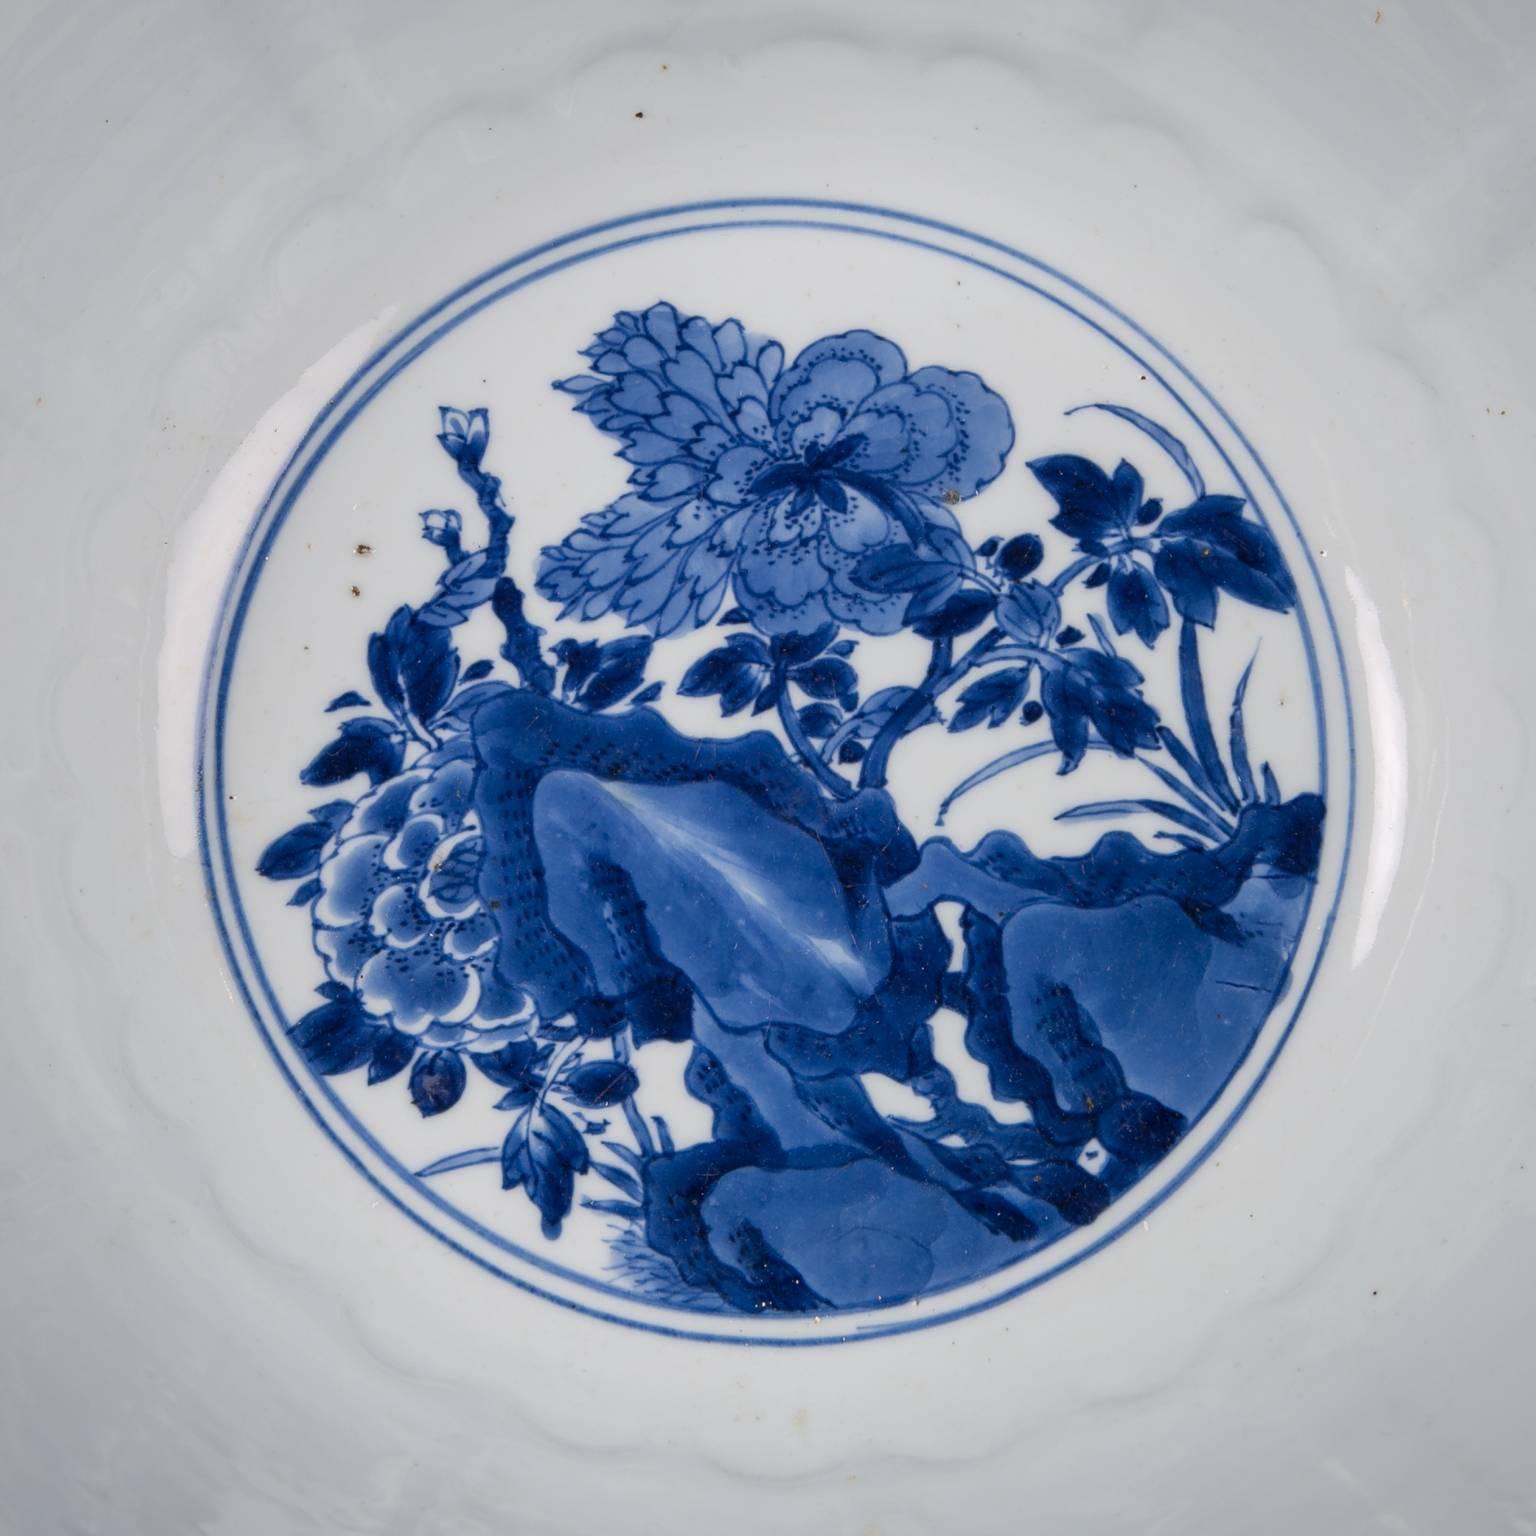 A pair of Antique Chinese Kangxi blue and white bowls. These large punch bowls are decorated to the outside with a variety of auspicious flowers framed in lotus petal panels. Flowers such as hydrangea, plum blossom, peonies, peach blossom all